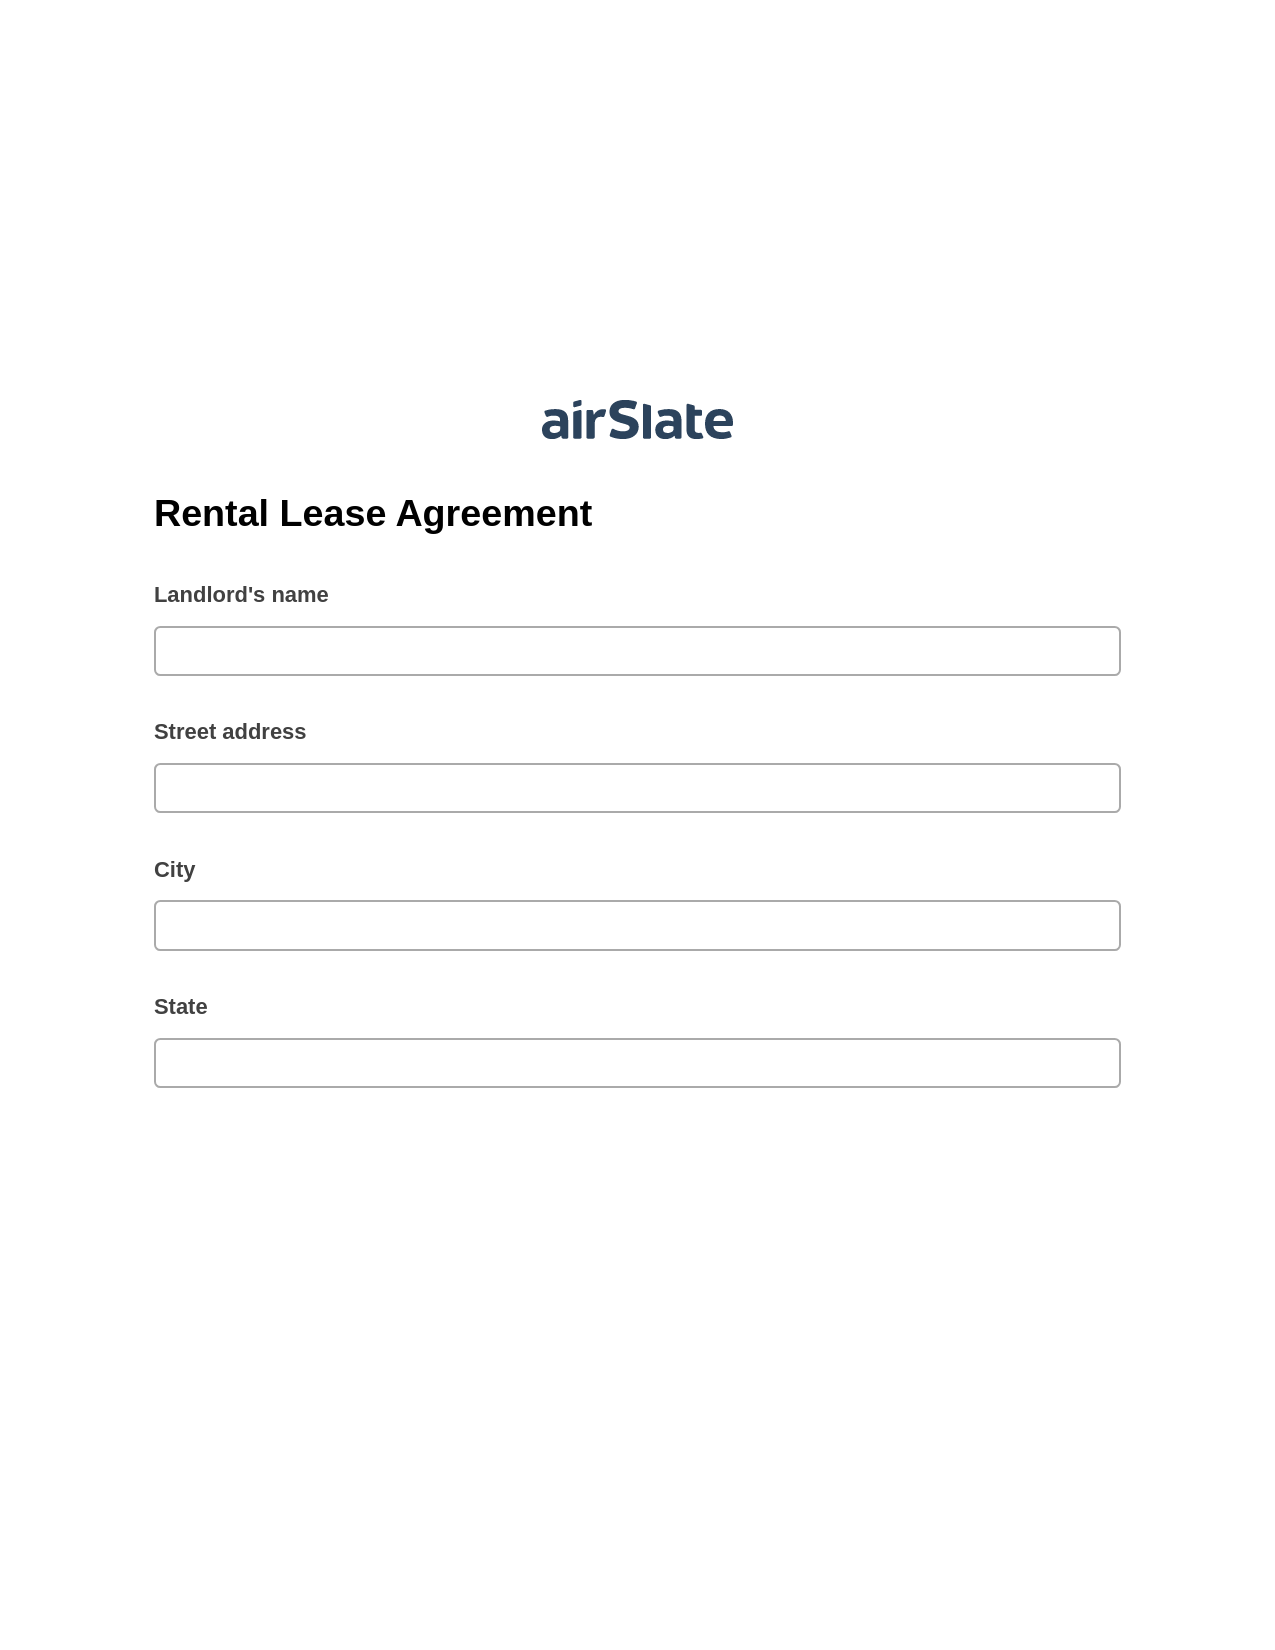 Rental Lease Agreement Pre-fill Dropdowns from Office 365 Excel Bot, Invoke Salesforce Process Bot, Export to Excel 365 Bot